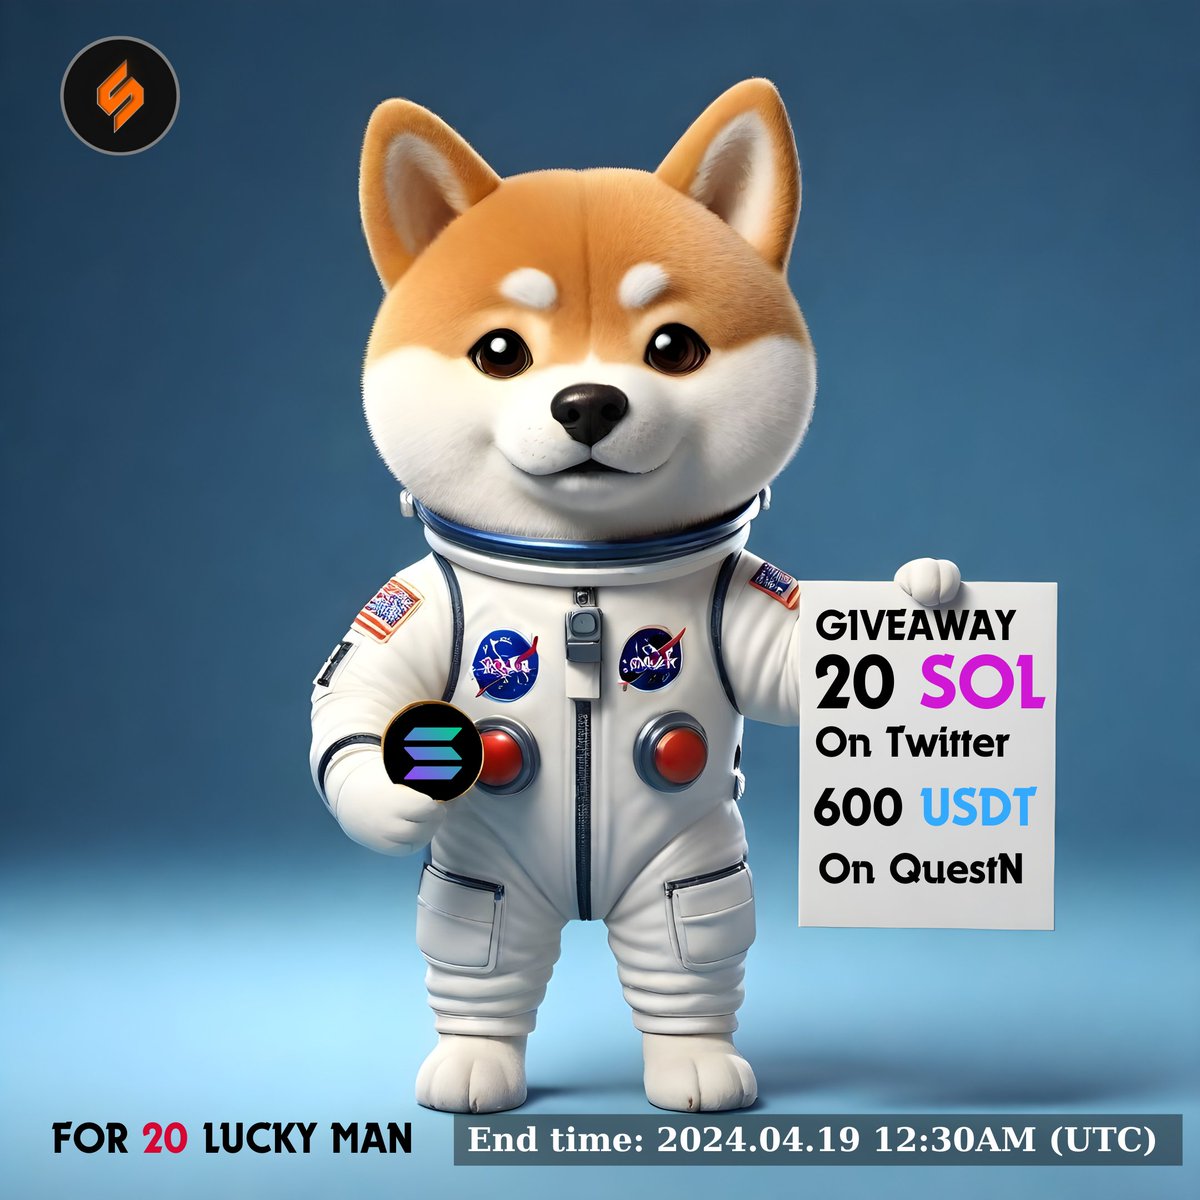 🪙 GIVEAWAY 600 USDT on QuestN, 20 SOL for 20 lucky people 🪙 QuestN: app.questn.com/quest/89423755… 1. Follow: twitter.com/Spacedog_fi 2. Join Channel: t.me/spacedog_chann… 3. Join Group: t.me/Group_spacedog 4. Like + RT this tweet 5. Comment Tag 3 friends with hastag #SPACEDOG